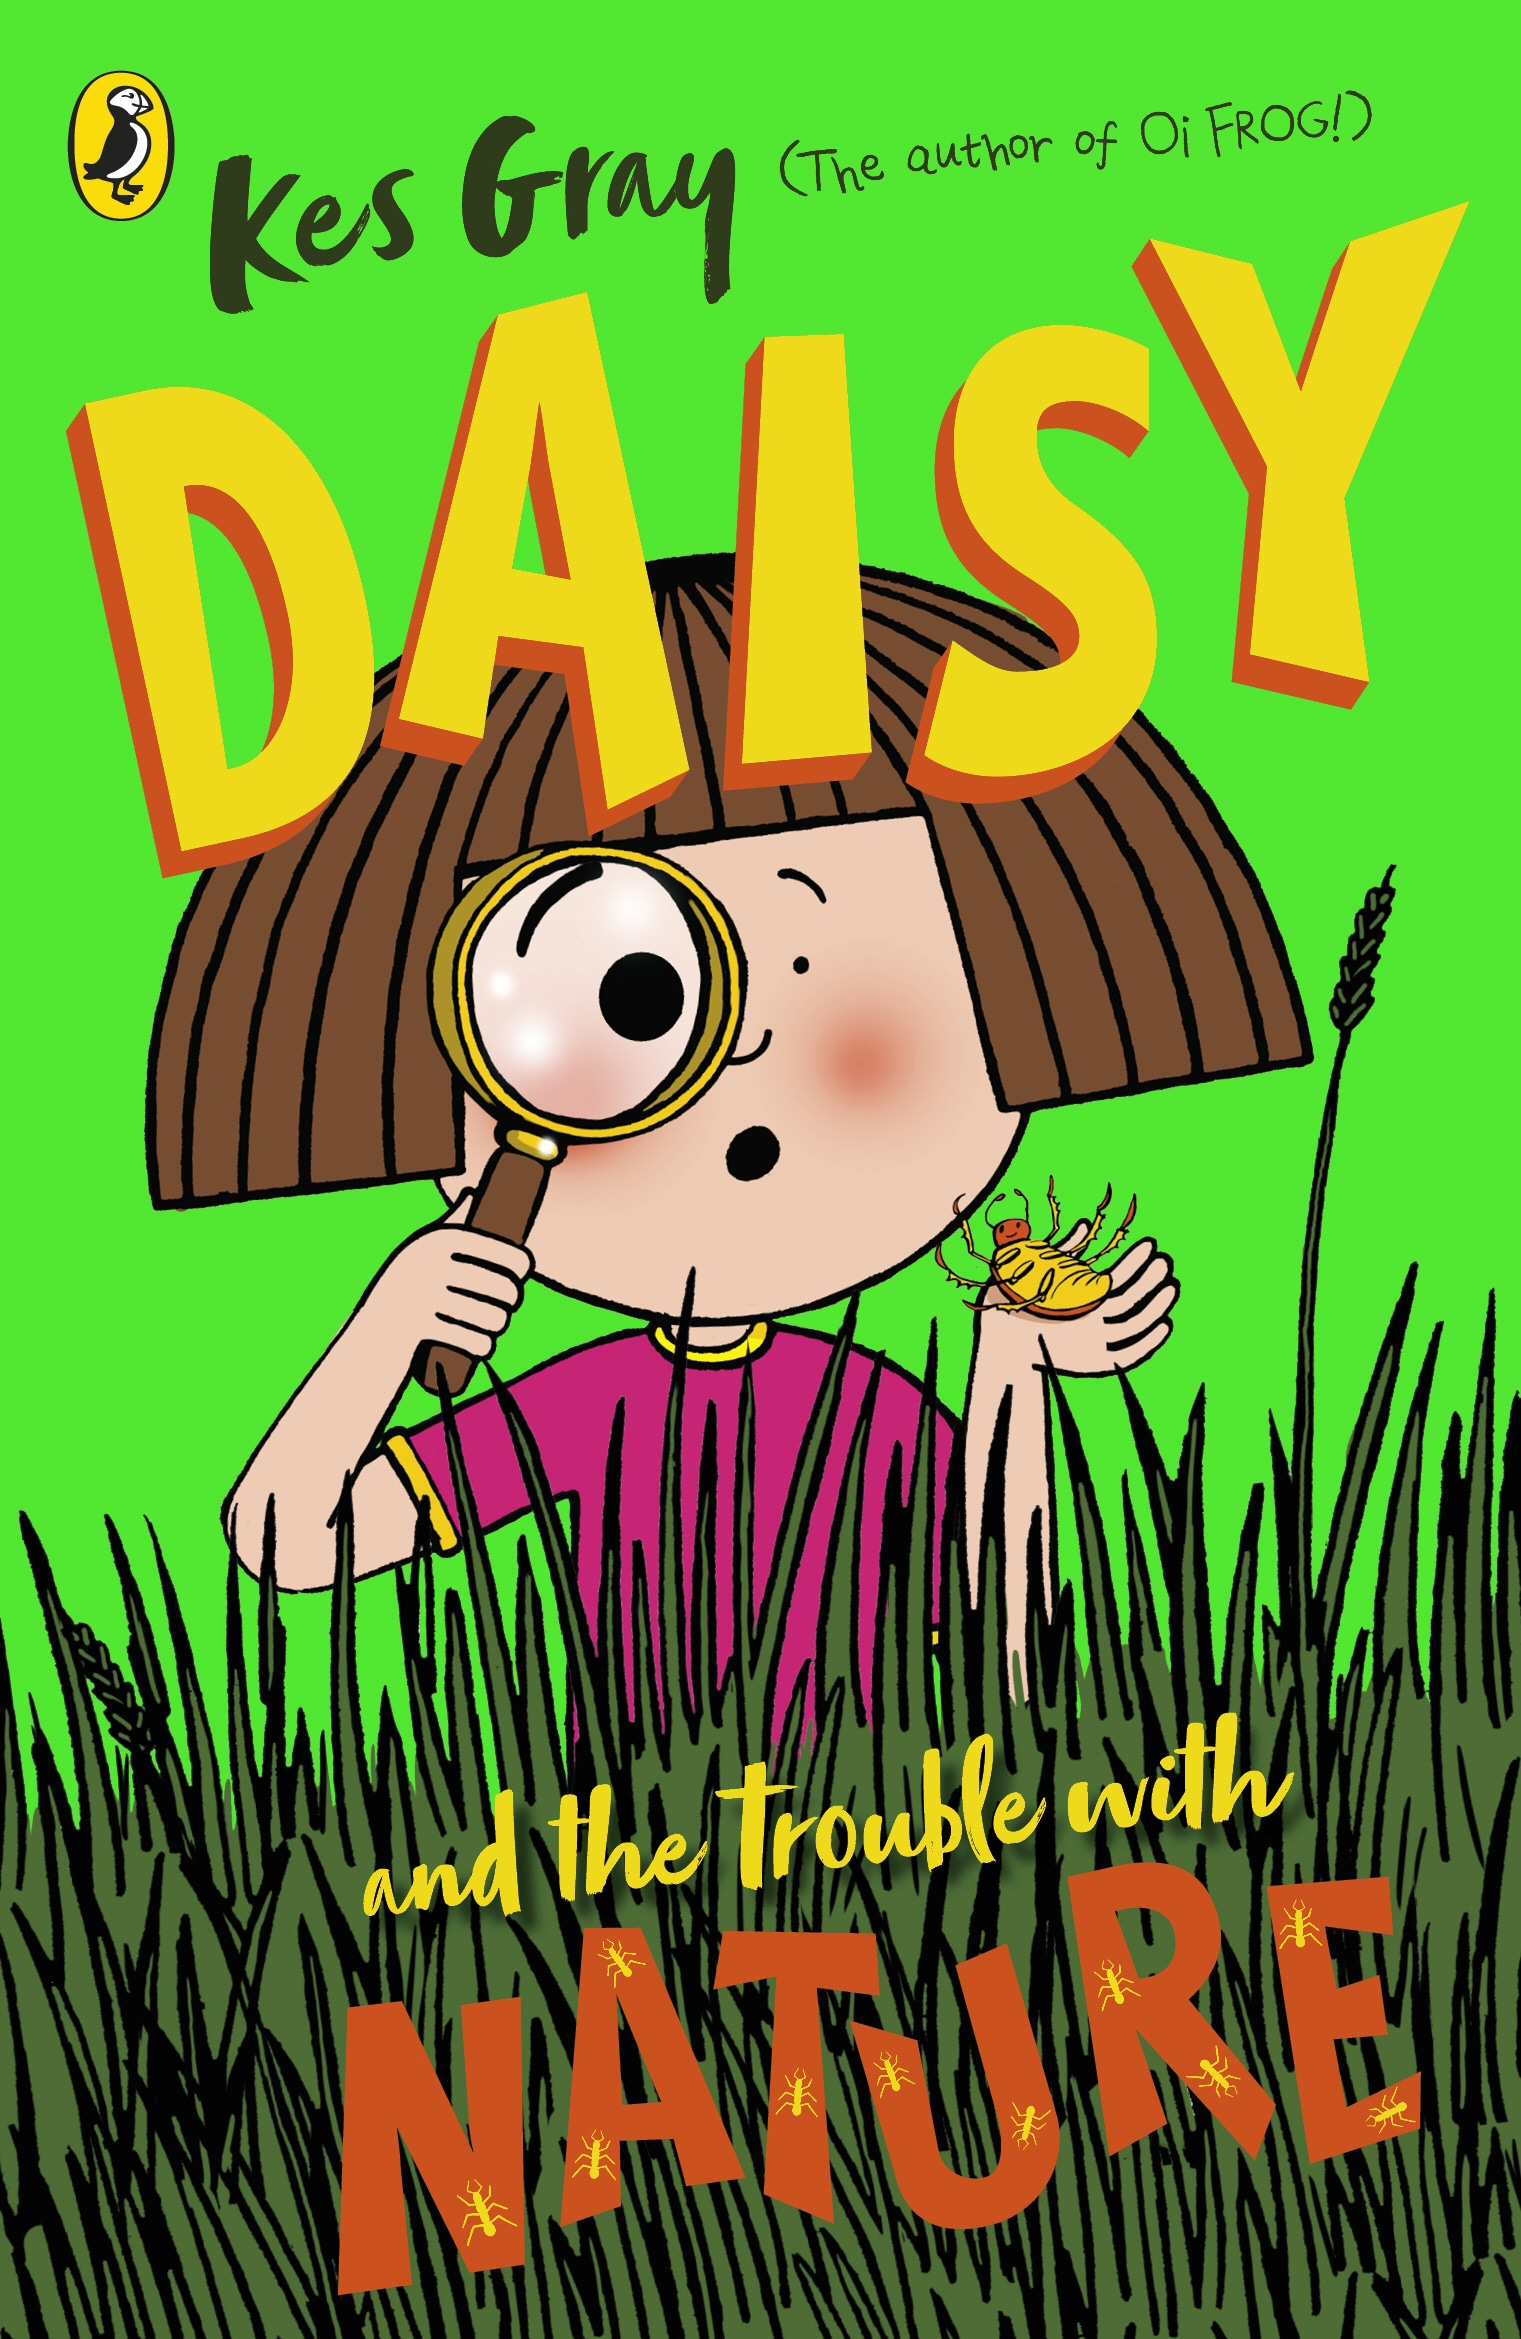 Book “Daisy and the Trouble with Nature” by Kes Gray — March 5, 2020